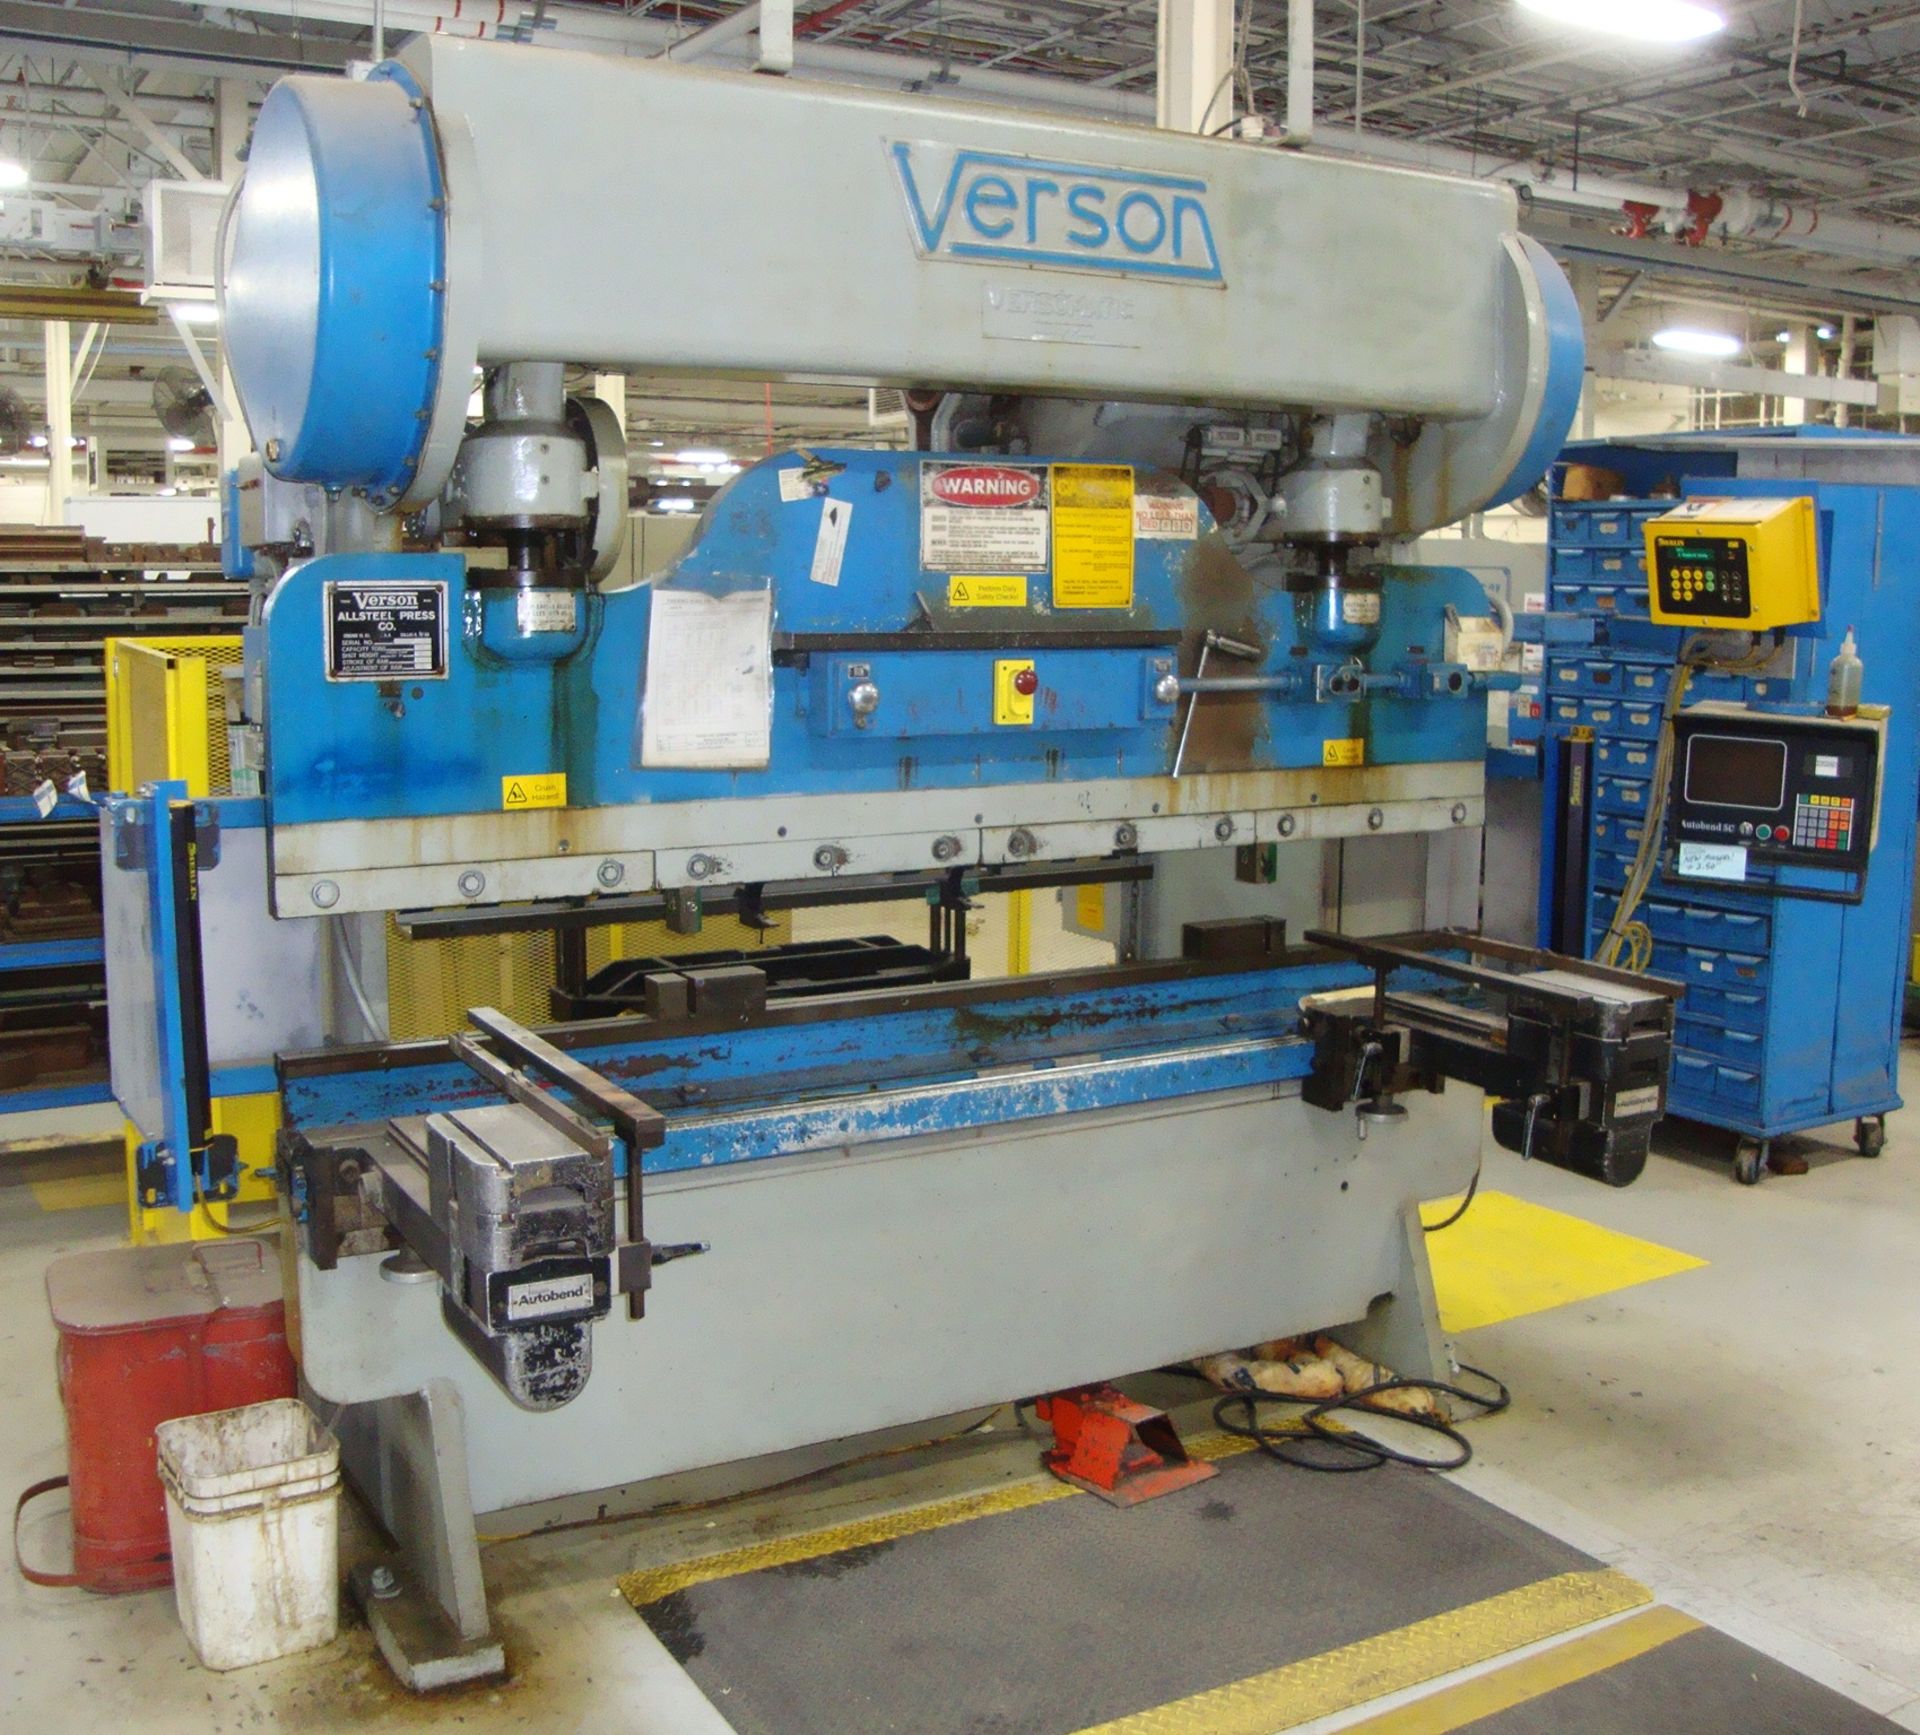 Verson 65 Ton 8' Press Versomatic w/Merlin Safety System, Serial # 22691-206.65, approx. 132" x - Image 3 of 57